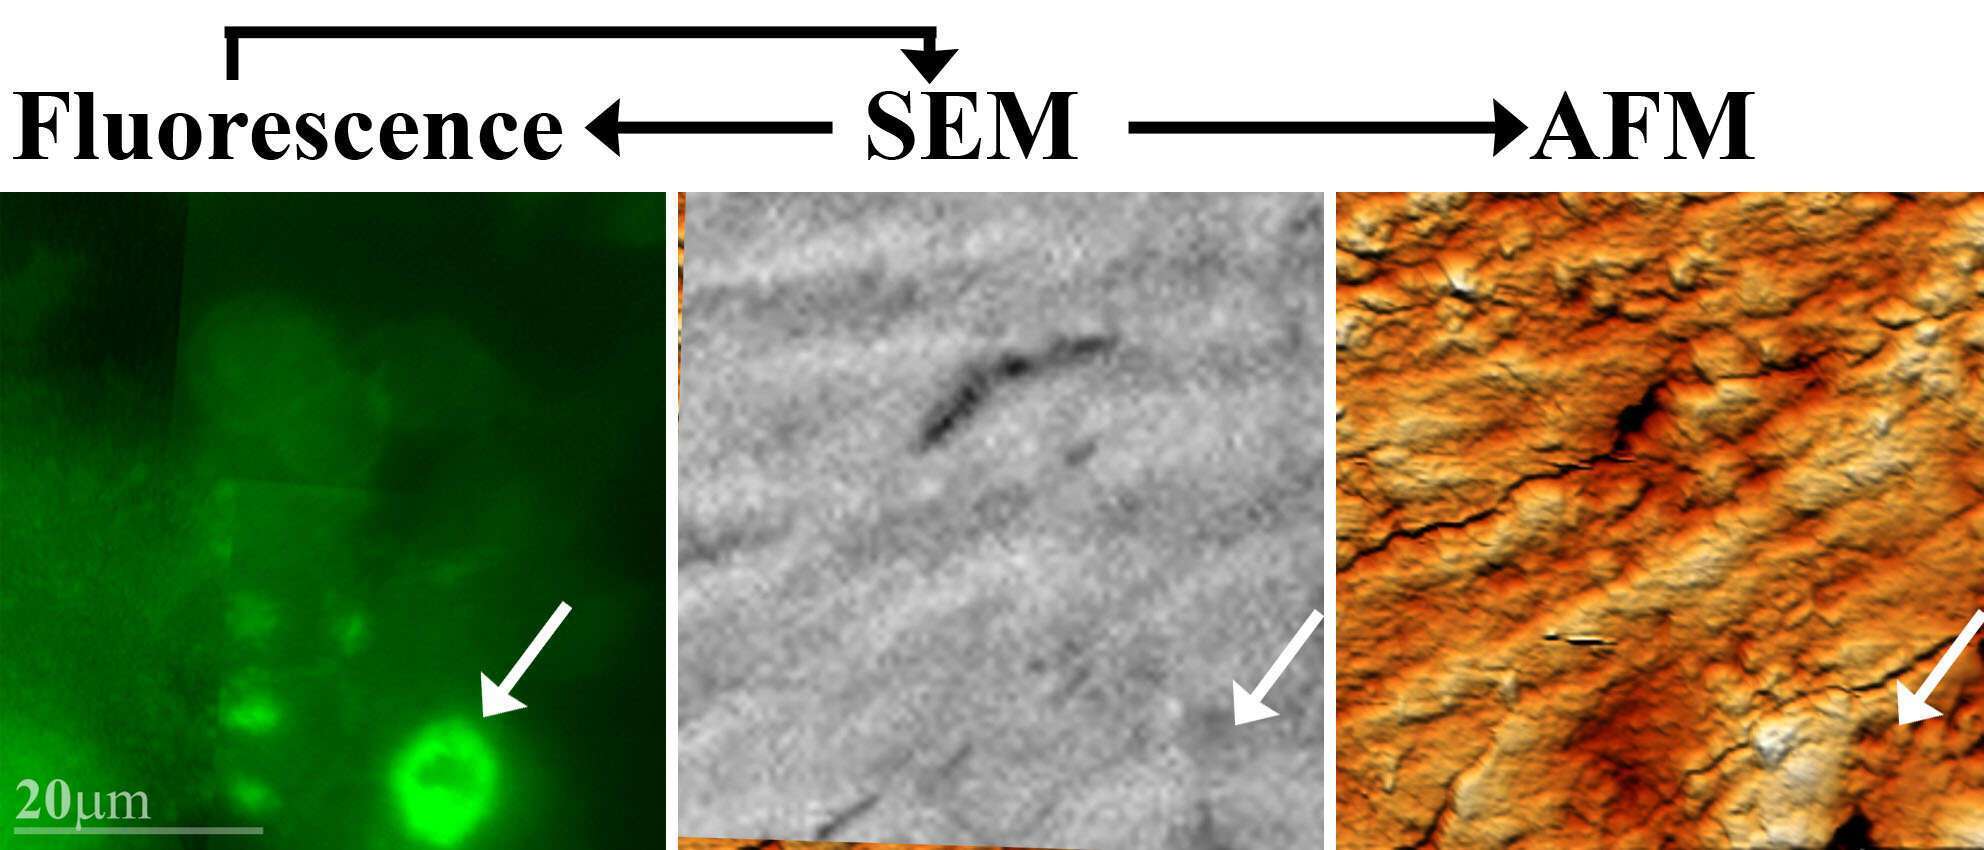 Correlation between sealing zone rings in osteoclasts and bone surface as imaged by the SEM and AFM